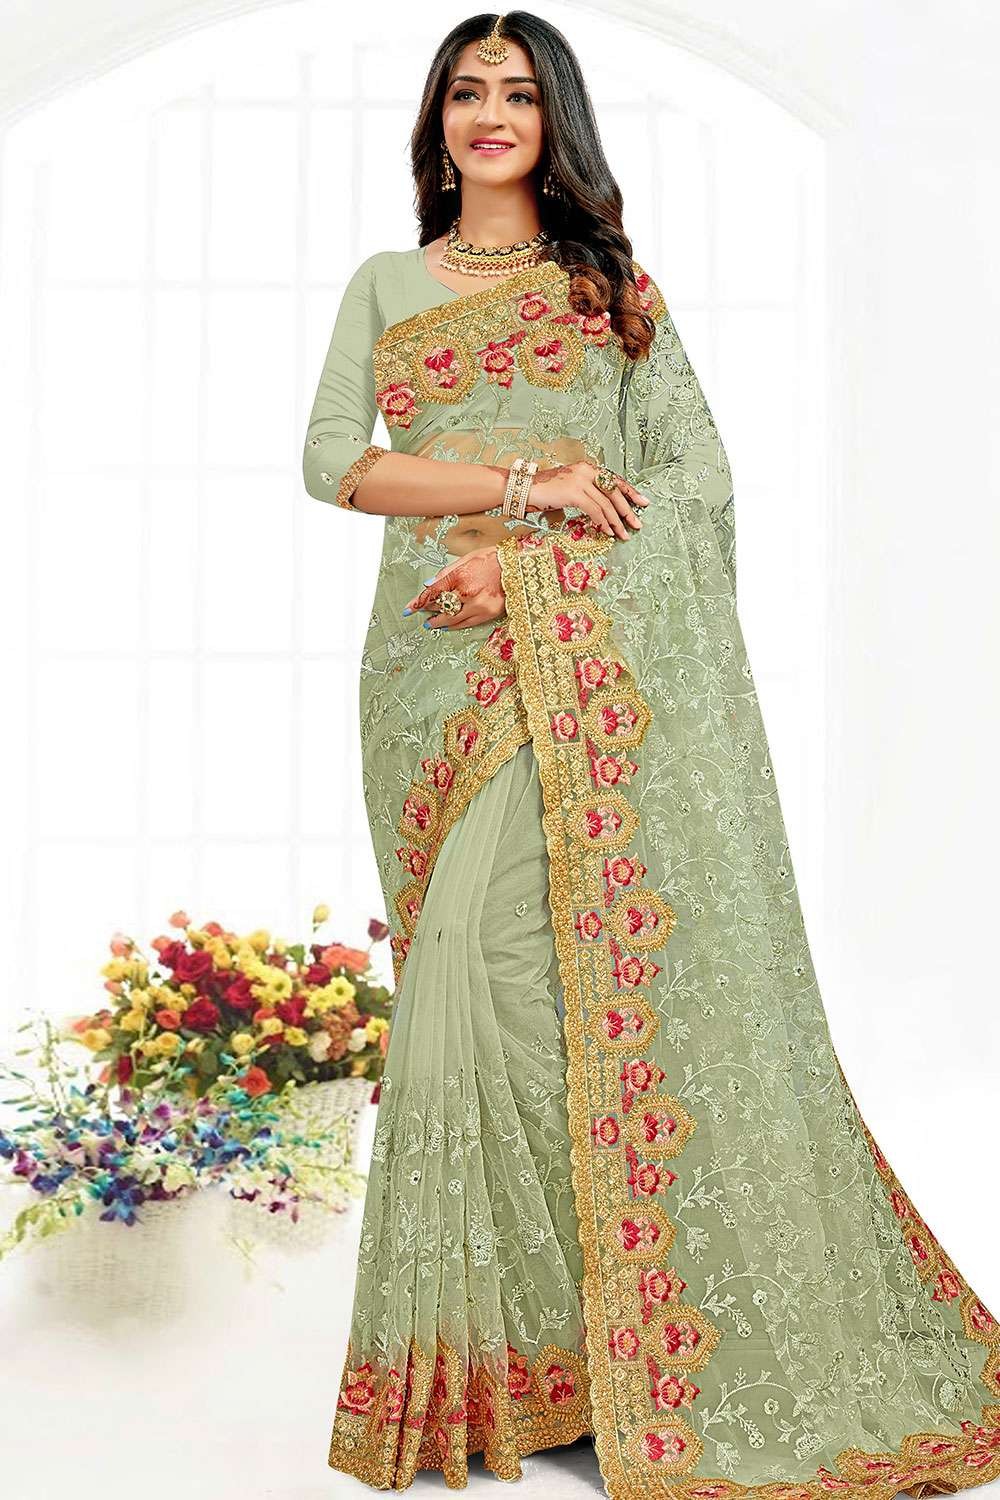 Pista Green Net Embroidery Work Saree Party Wear